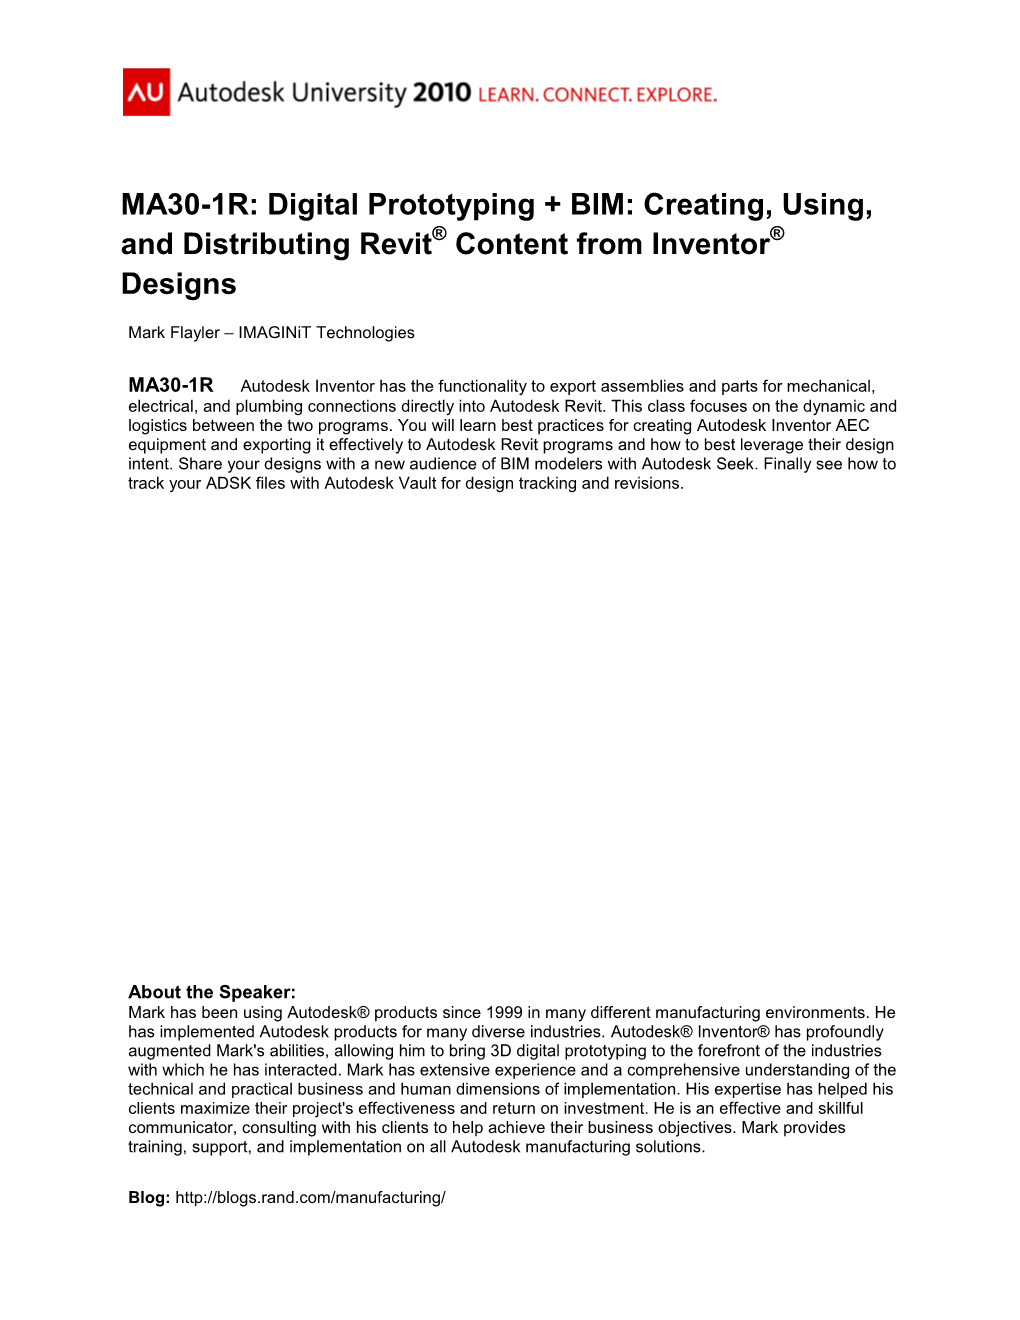 MA30-1R: Digital Prototyping + BIM: Creating, Using, and Distributing Revit® Content from Inventor® Designs